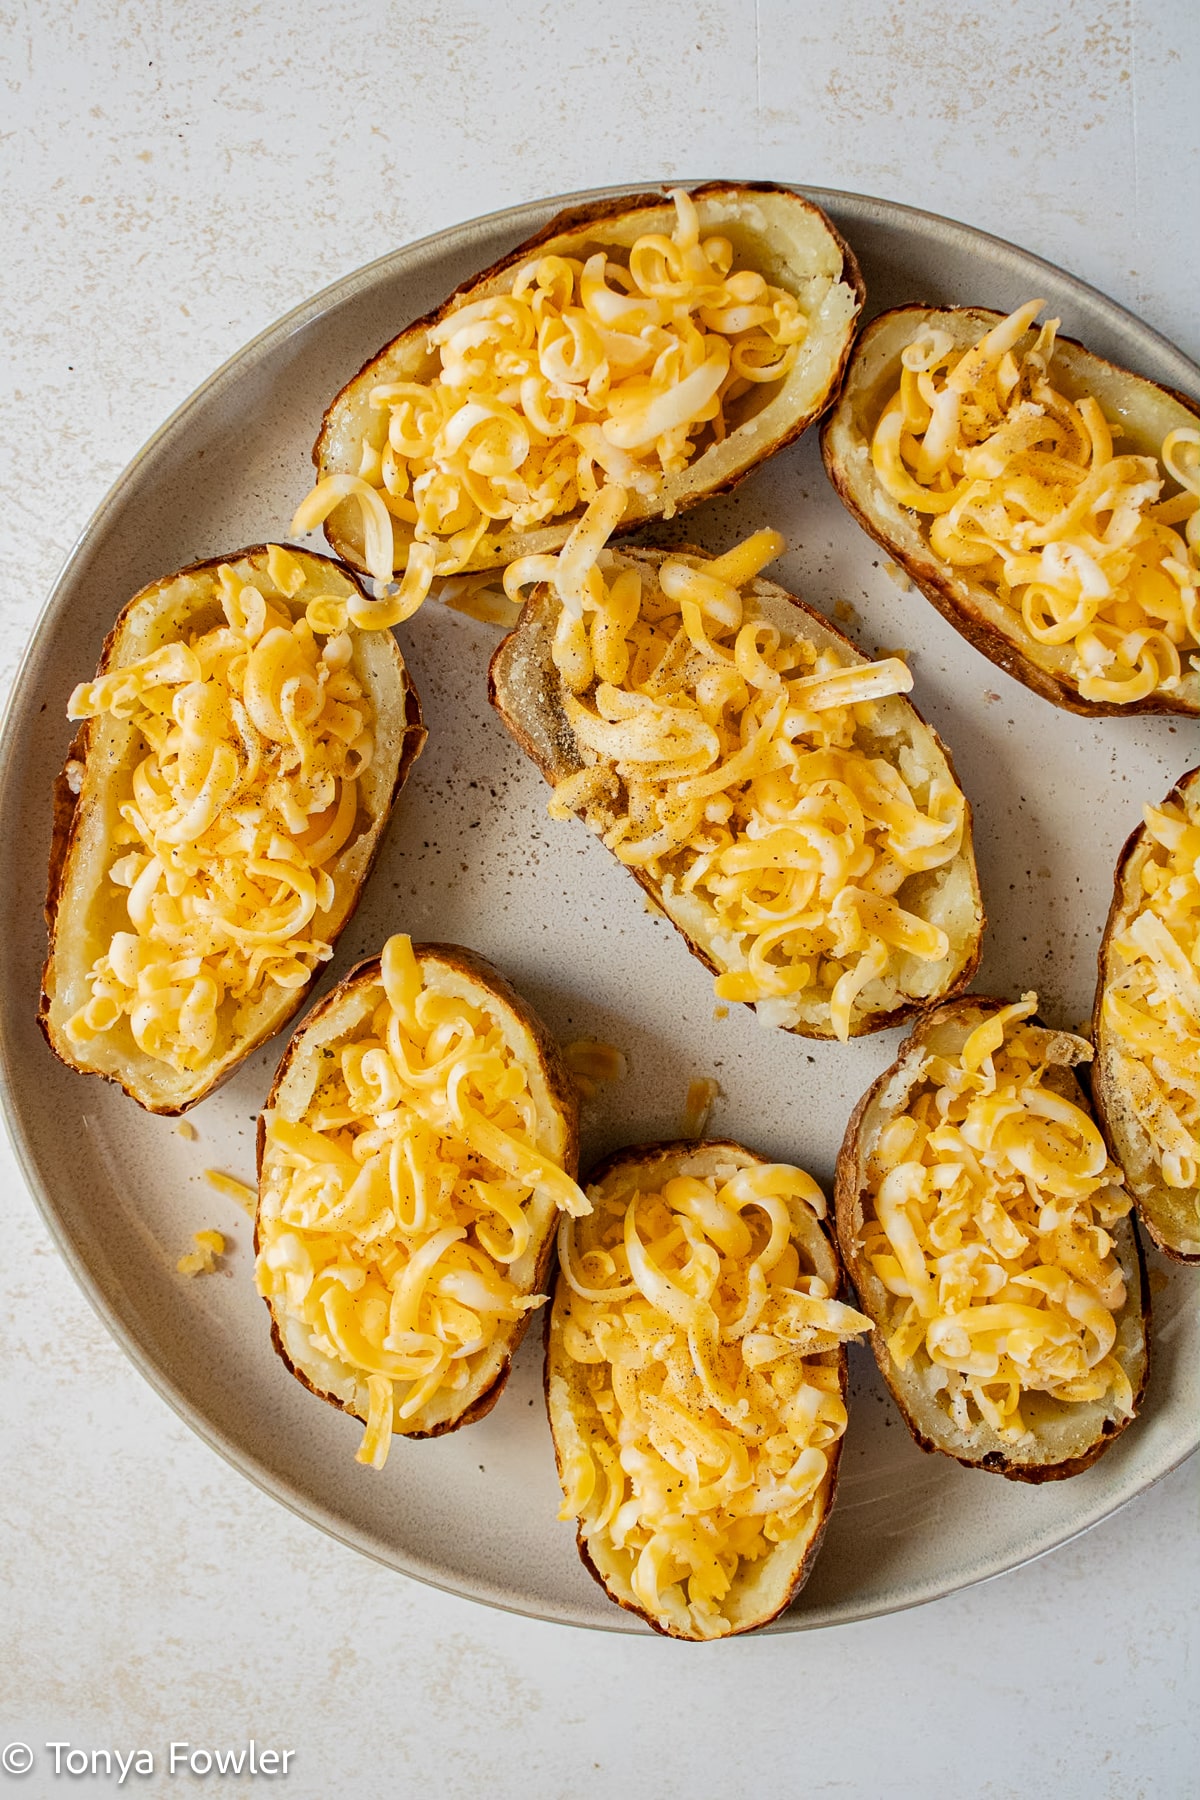 Potato skins filled with cheese.